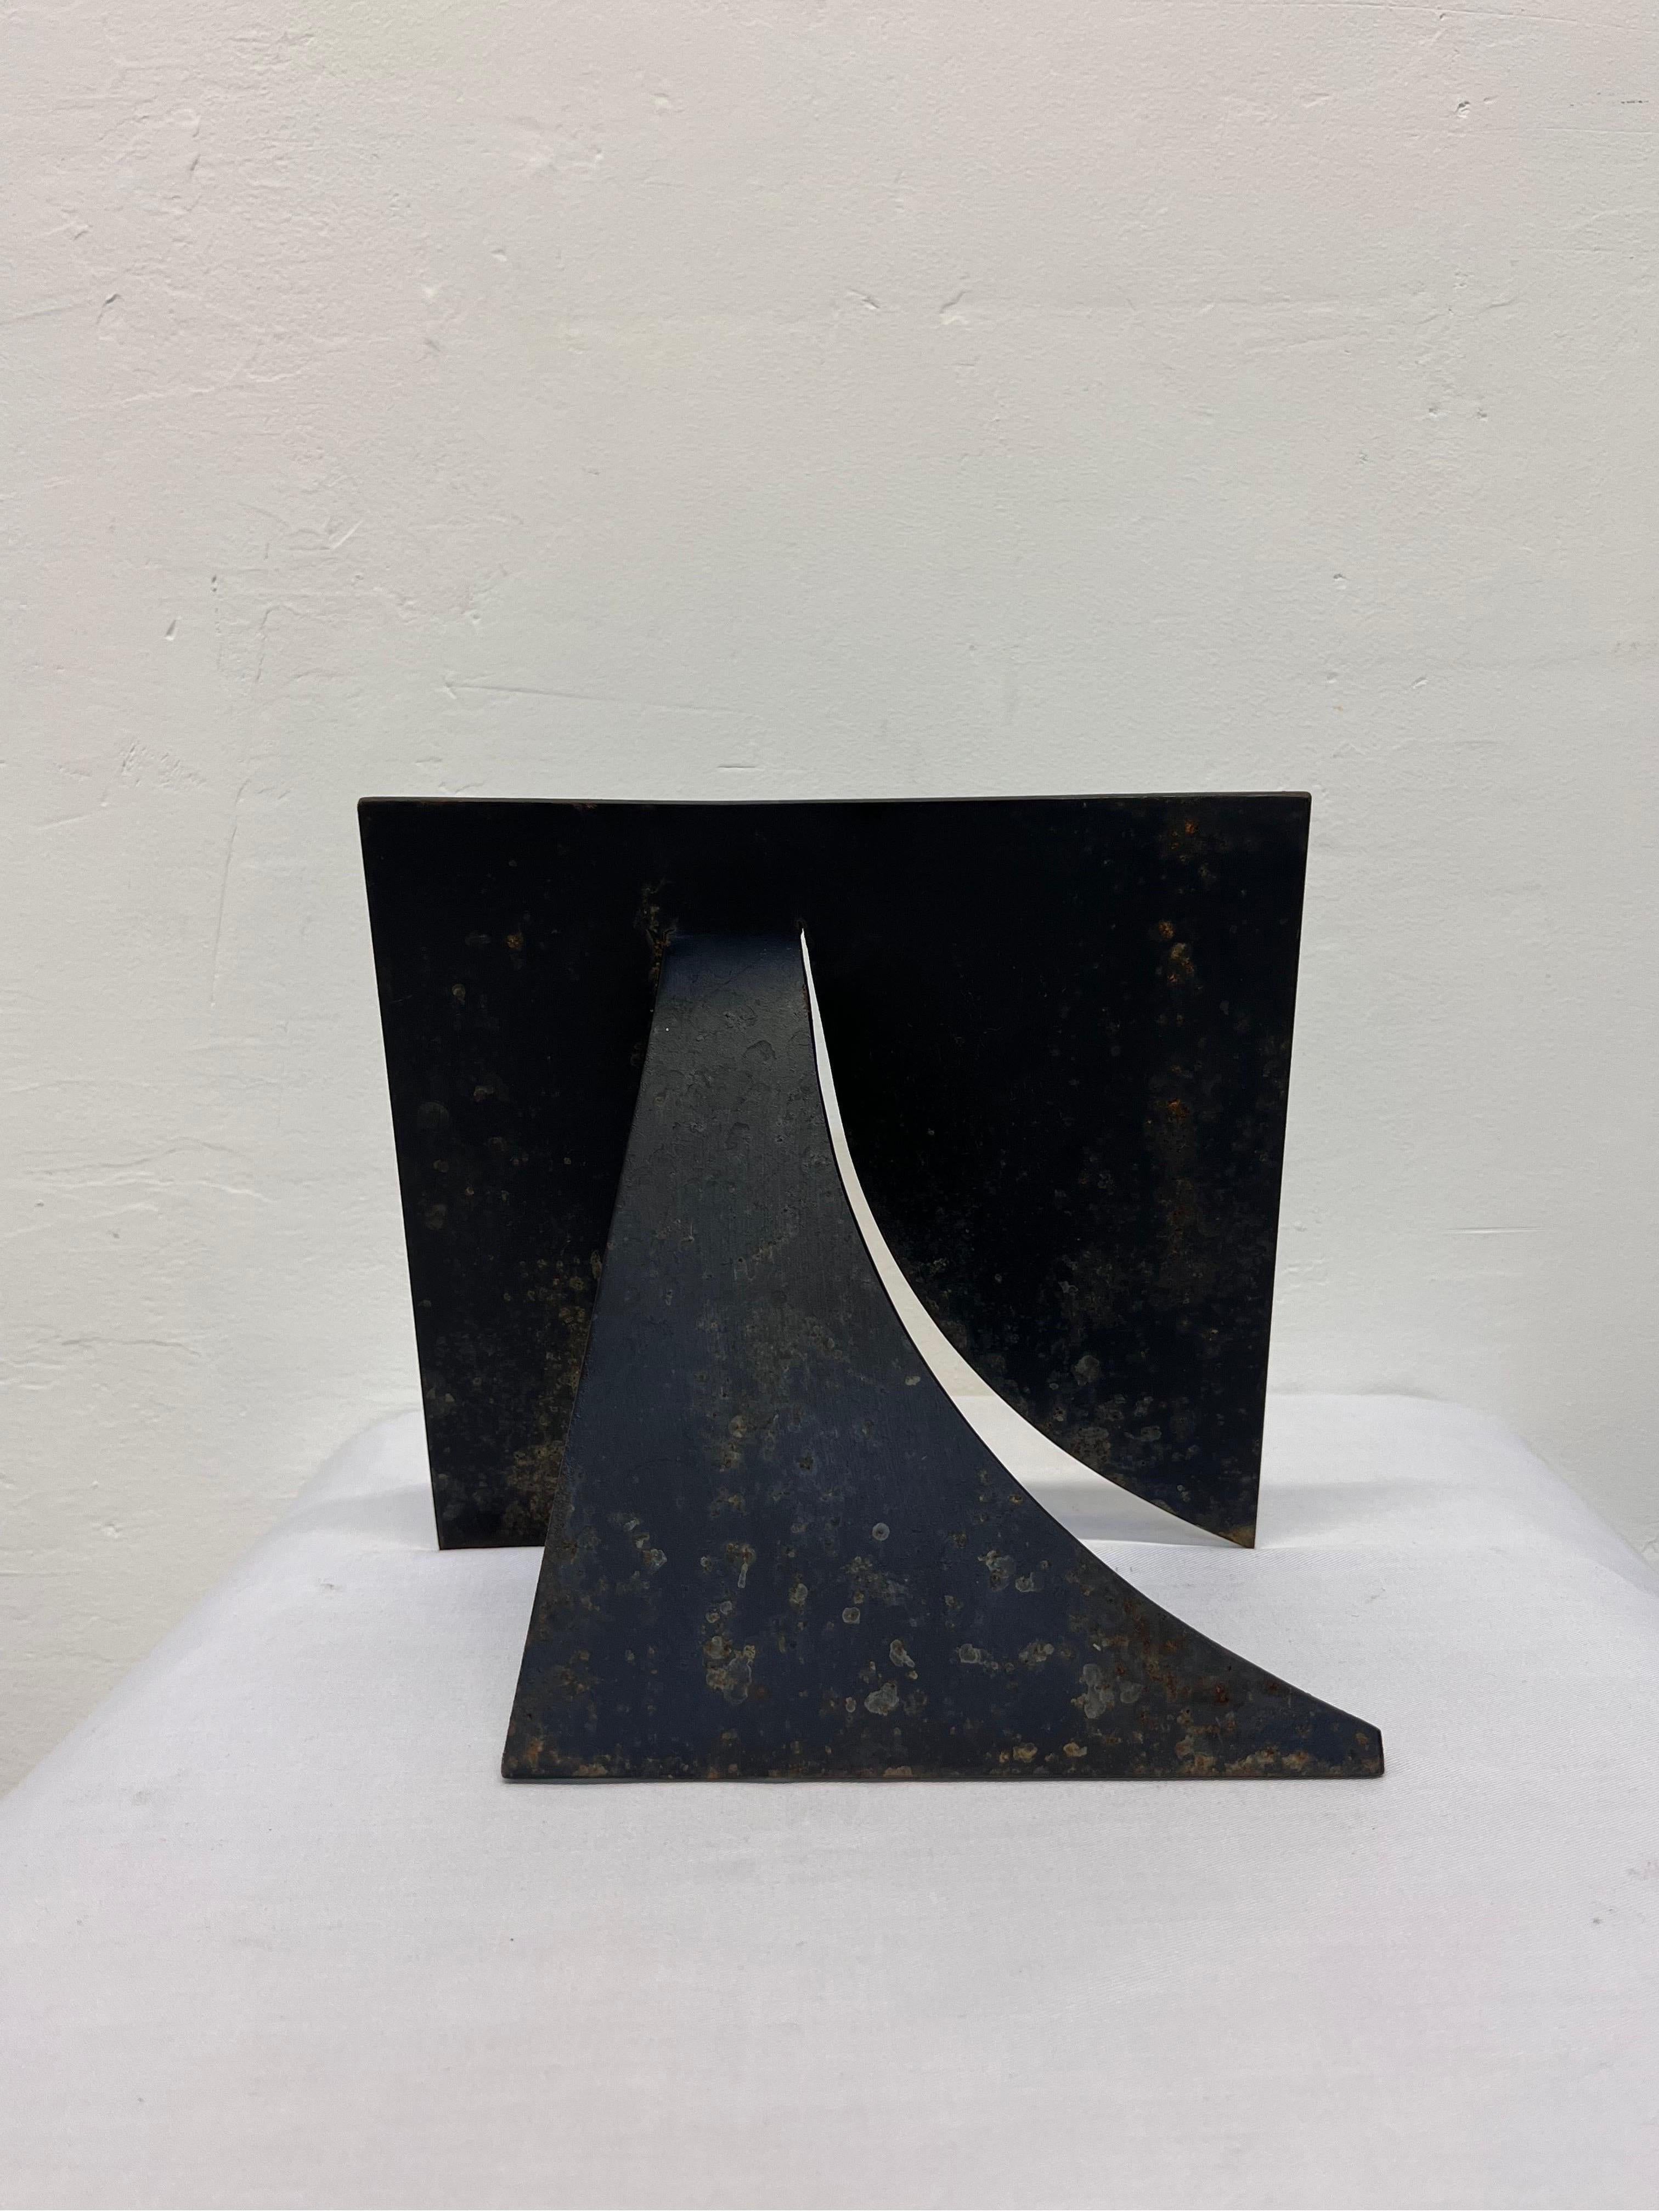 Brazilian Modern Black Steel Abstract Table Sculpture, 1980s For Sale 1